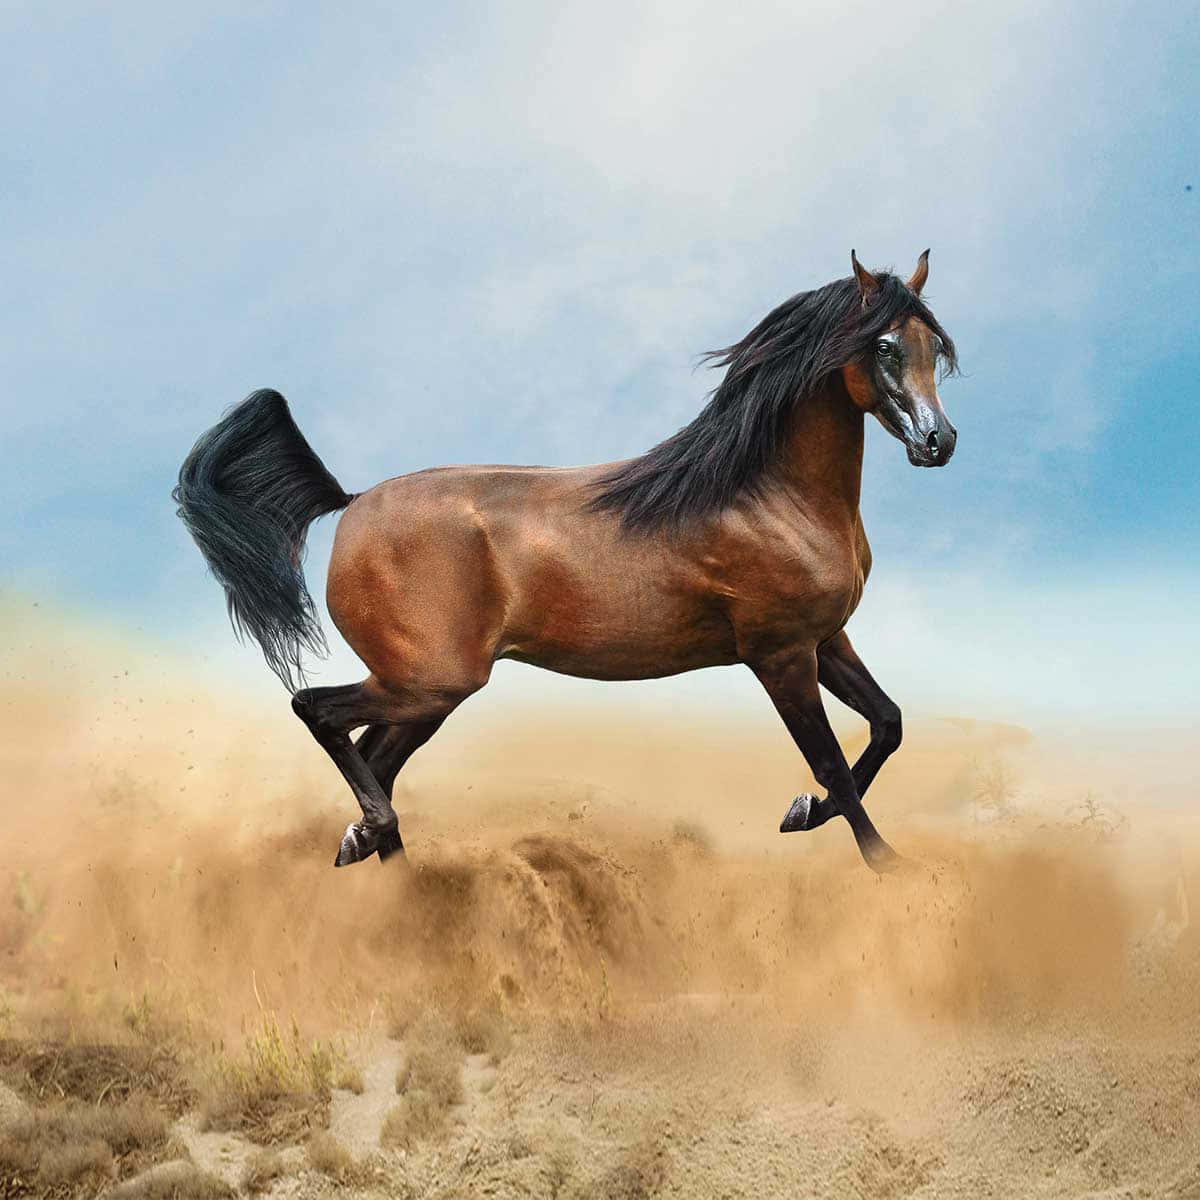 A Horse Running In The Desert With A Blue Sky